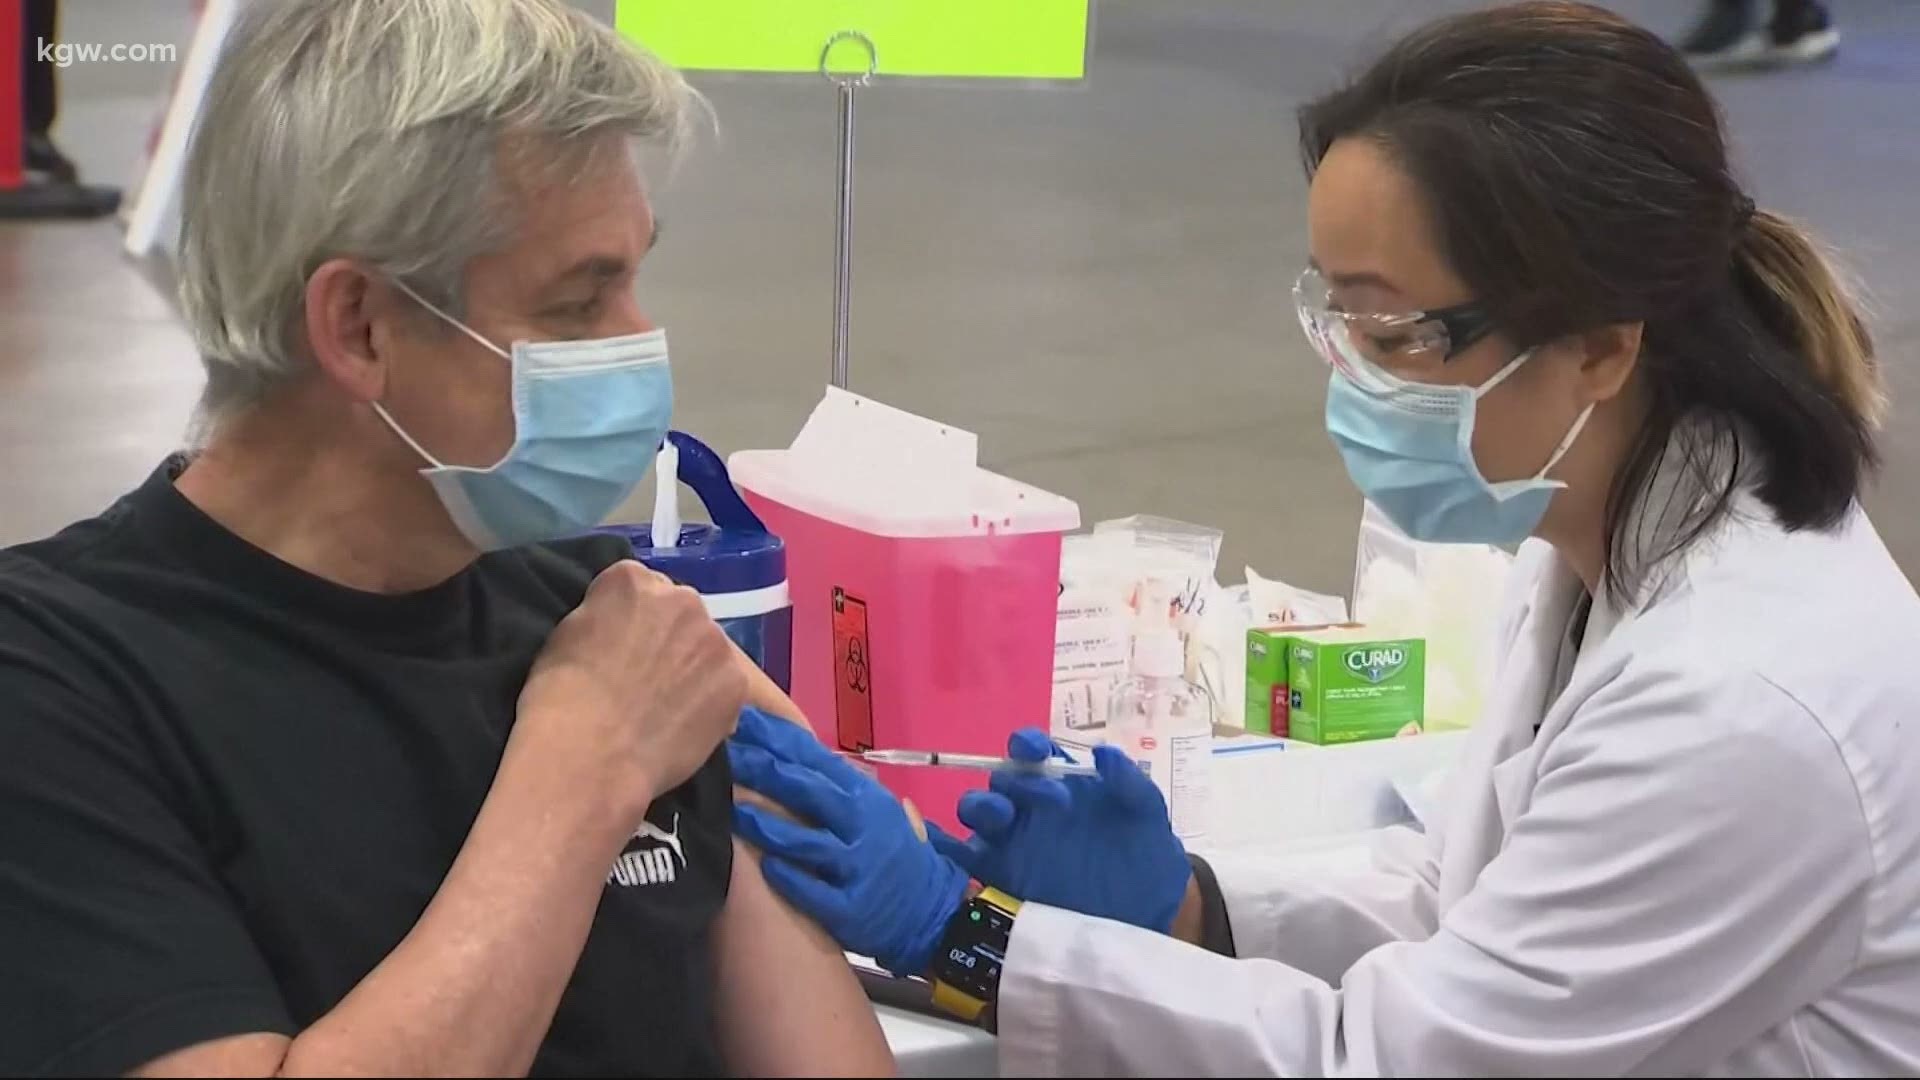 Washington has new rules to speed up the vaccination process. Tim Gordon reports.